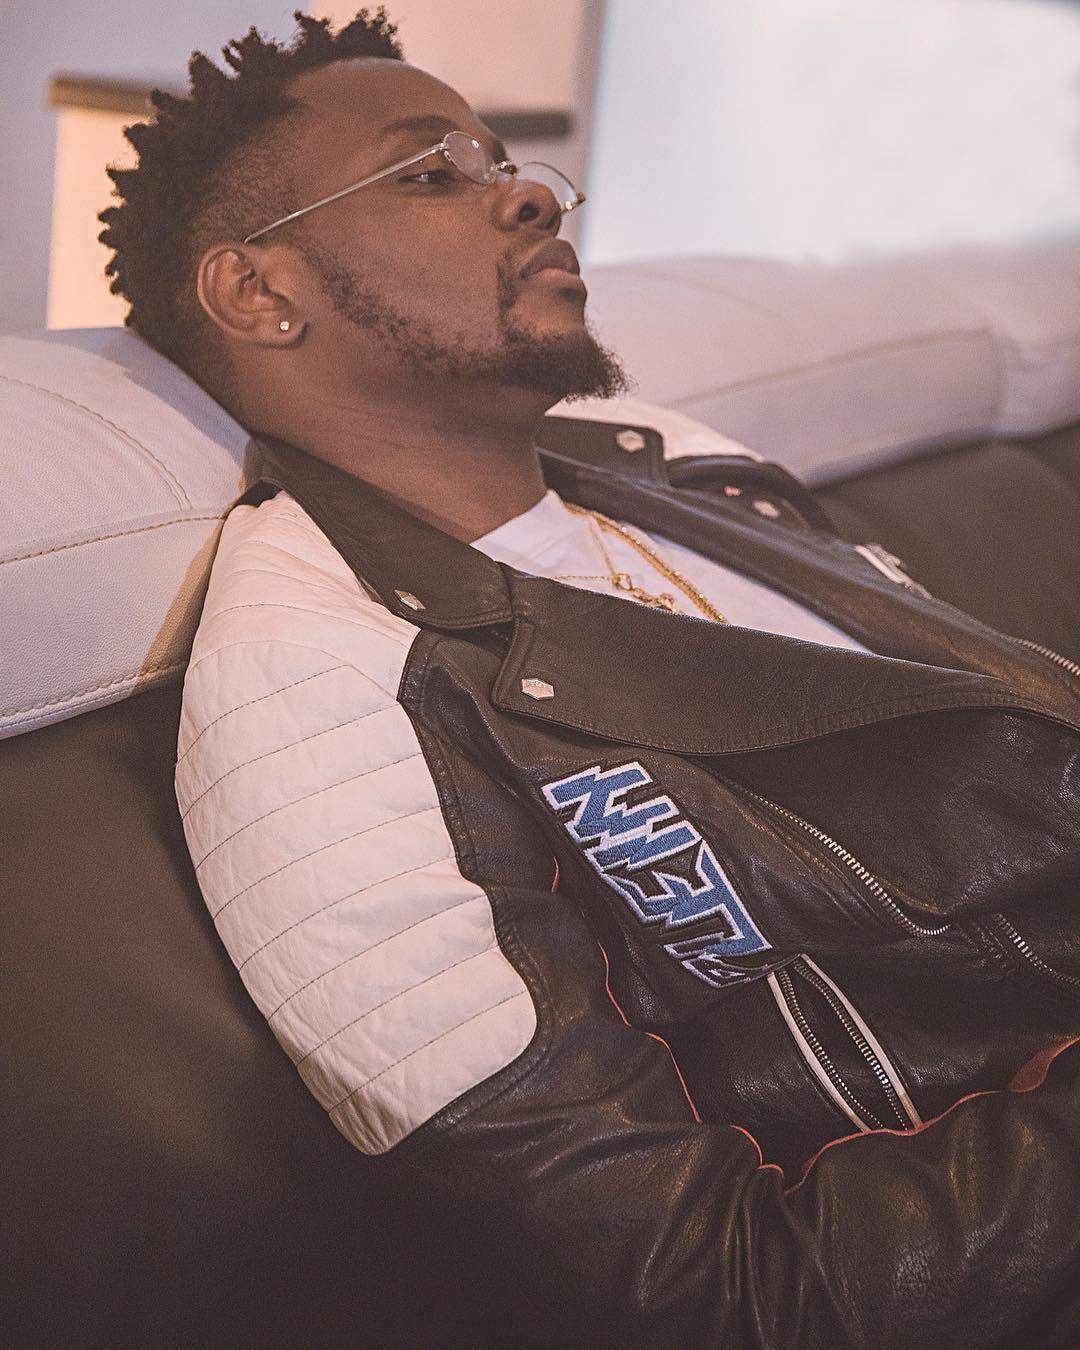 My new song, one ticket has damaged my relationship - Kizz Daniel says